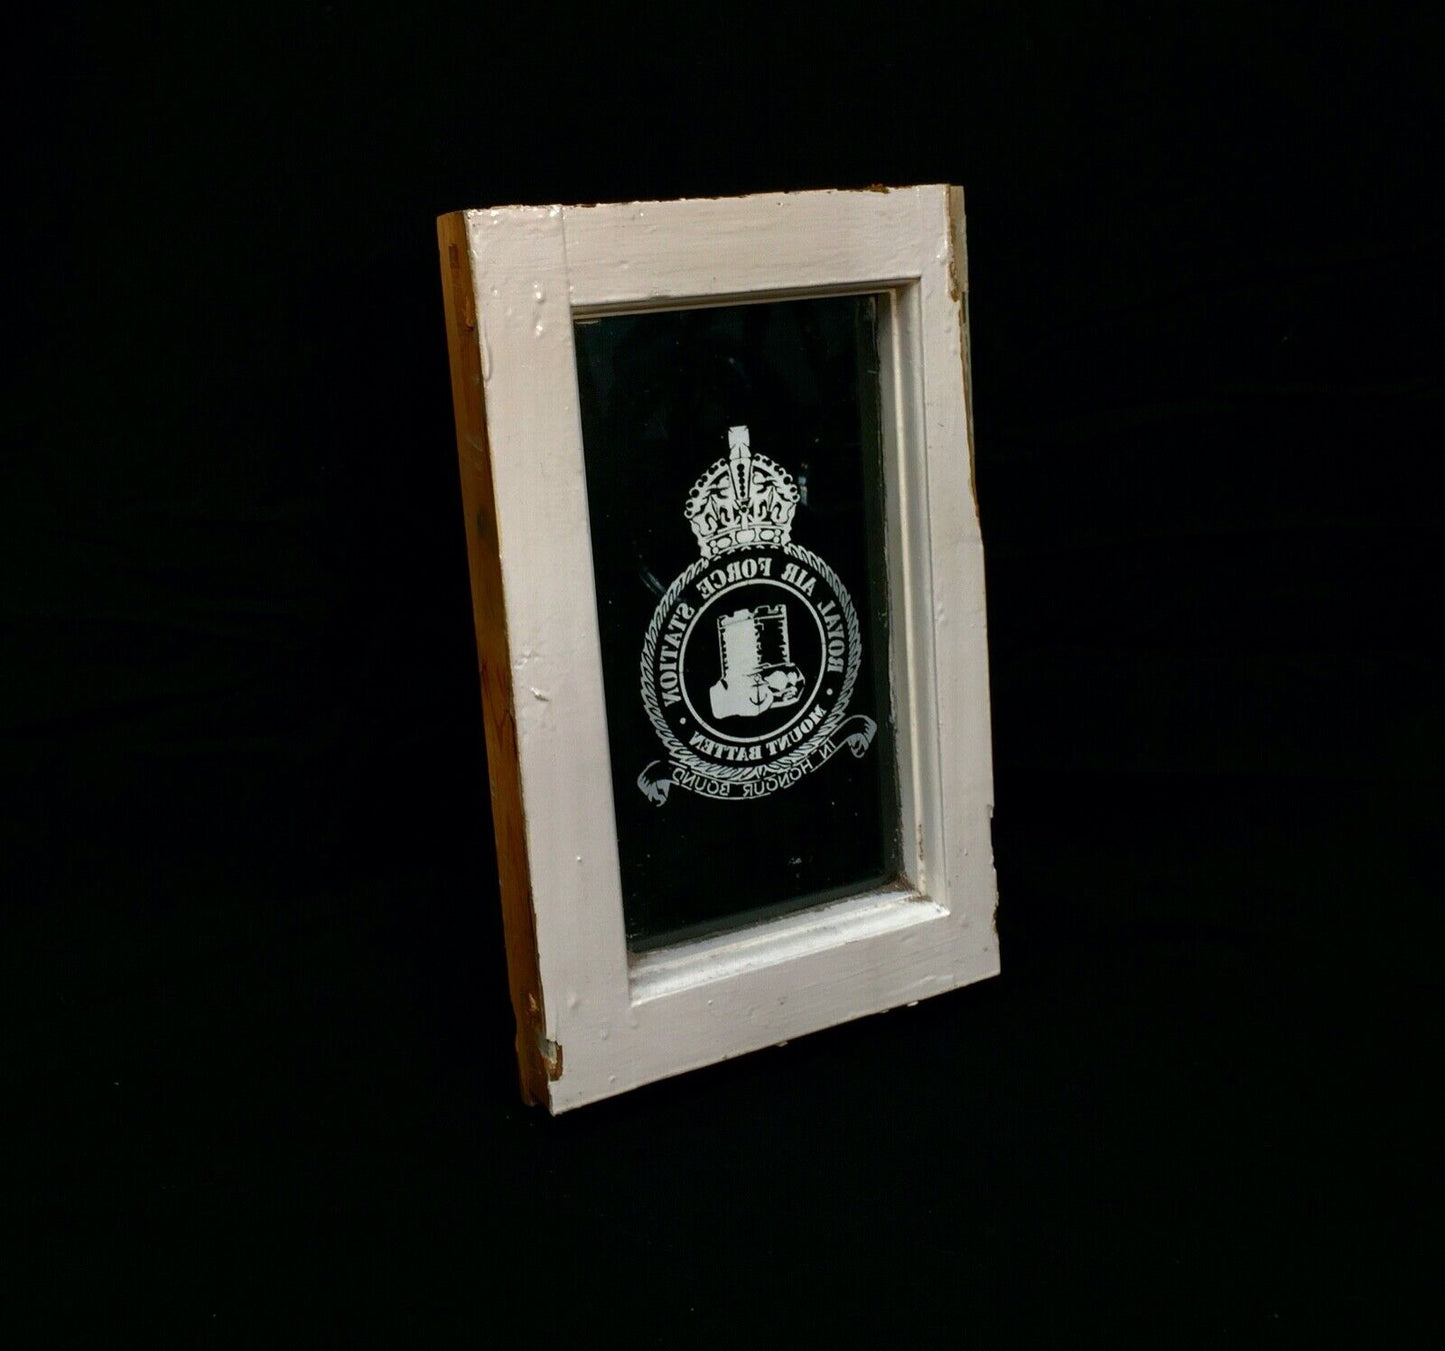 Antique Sign - RAF (Royal Air Force) Mount Batten Salvaged Glass Window in Frame